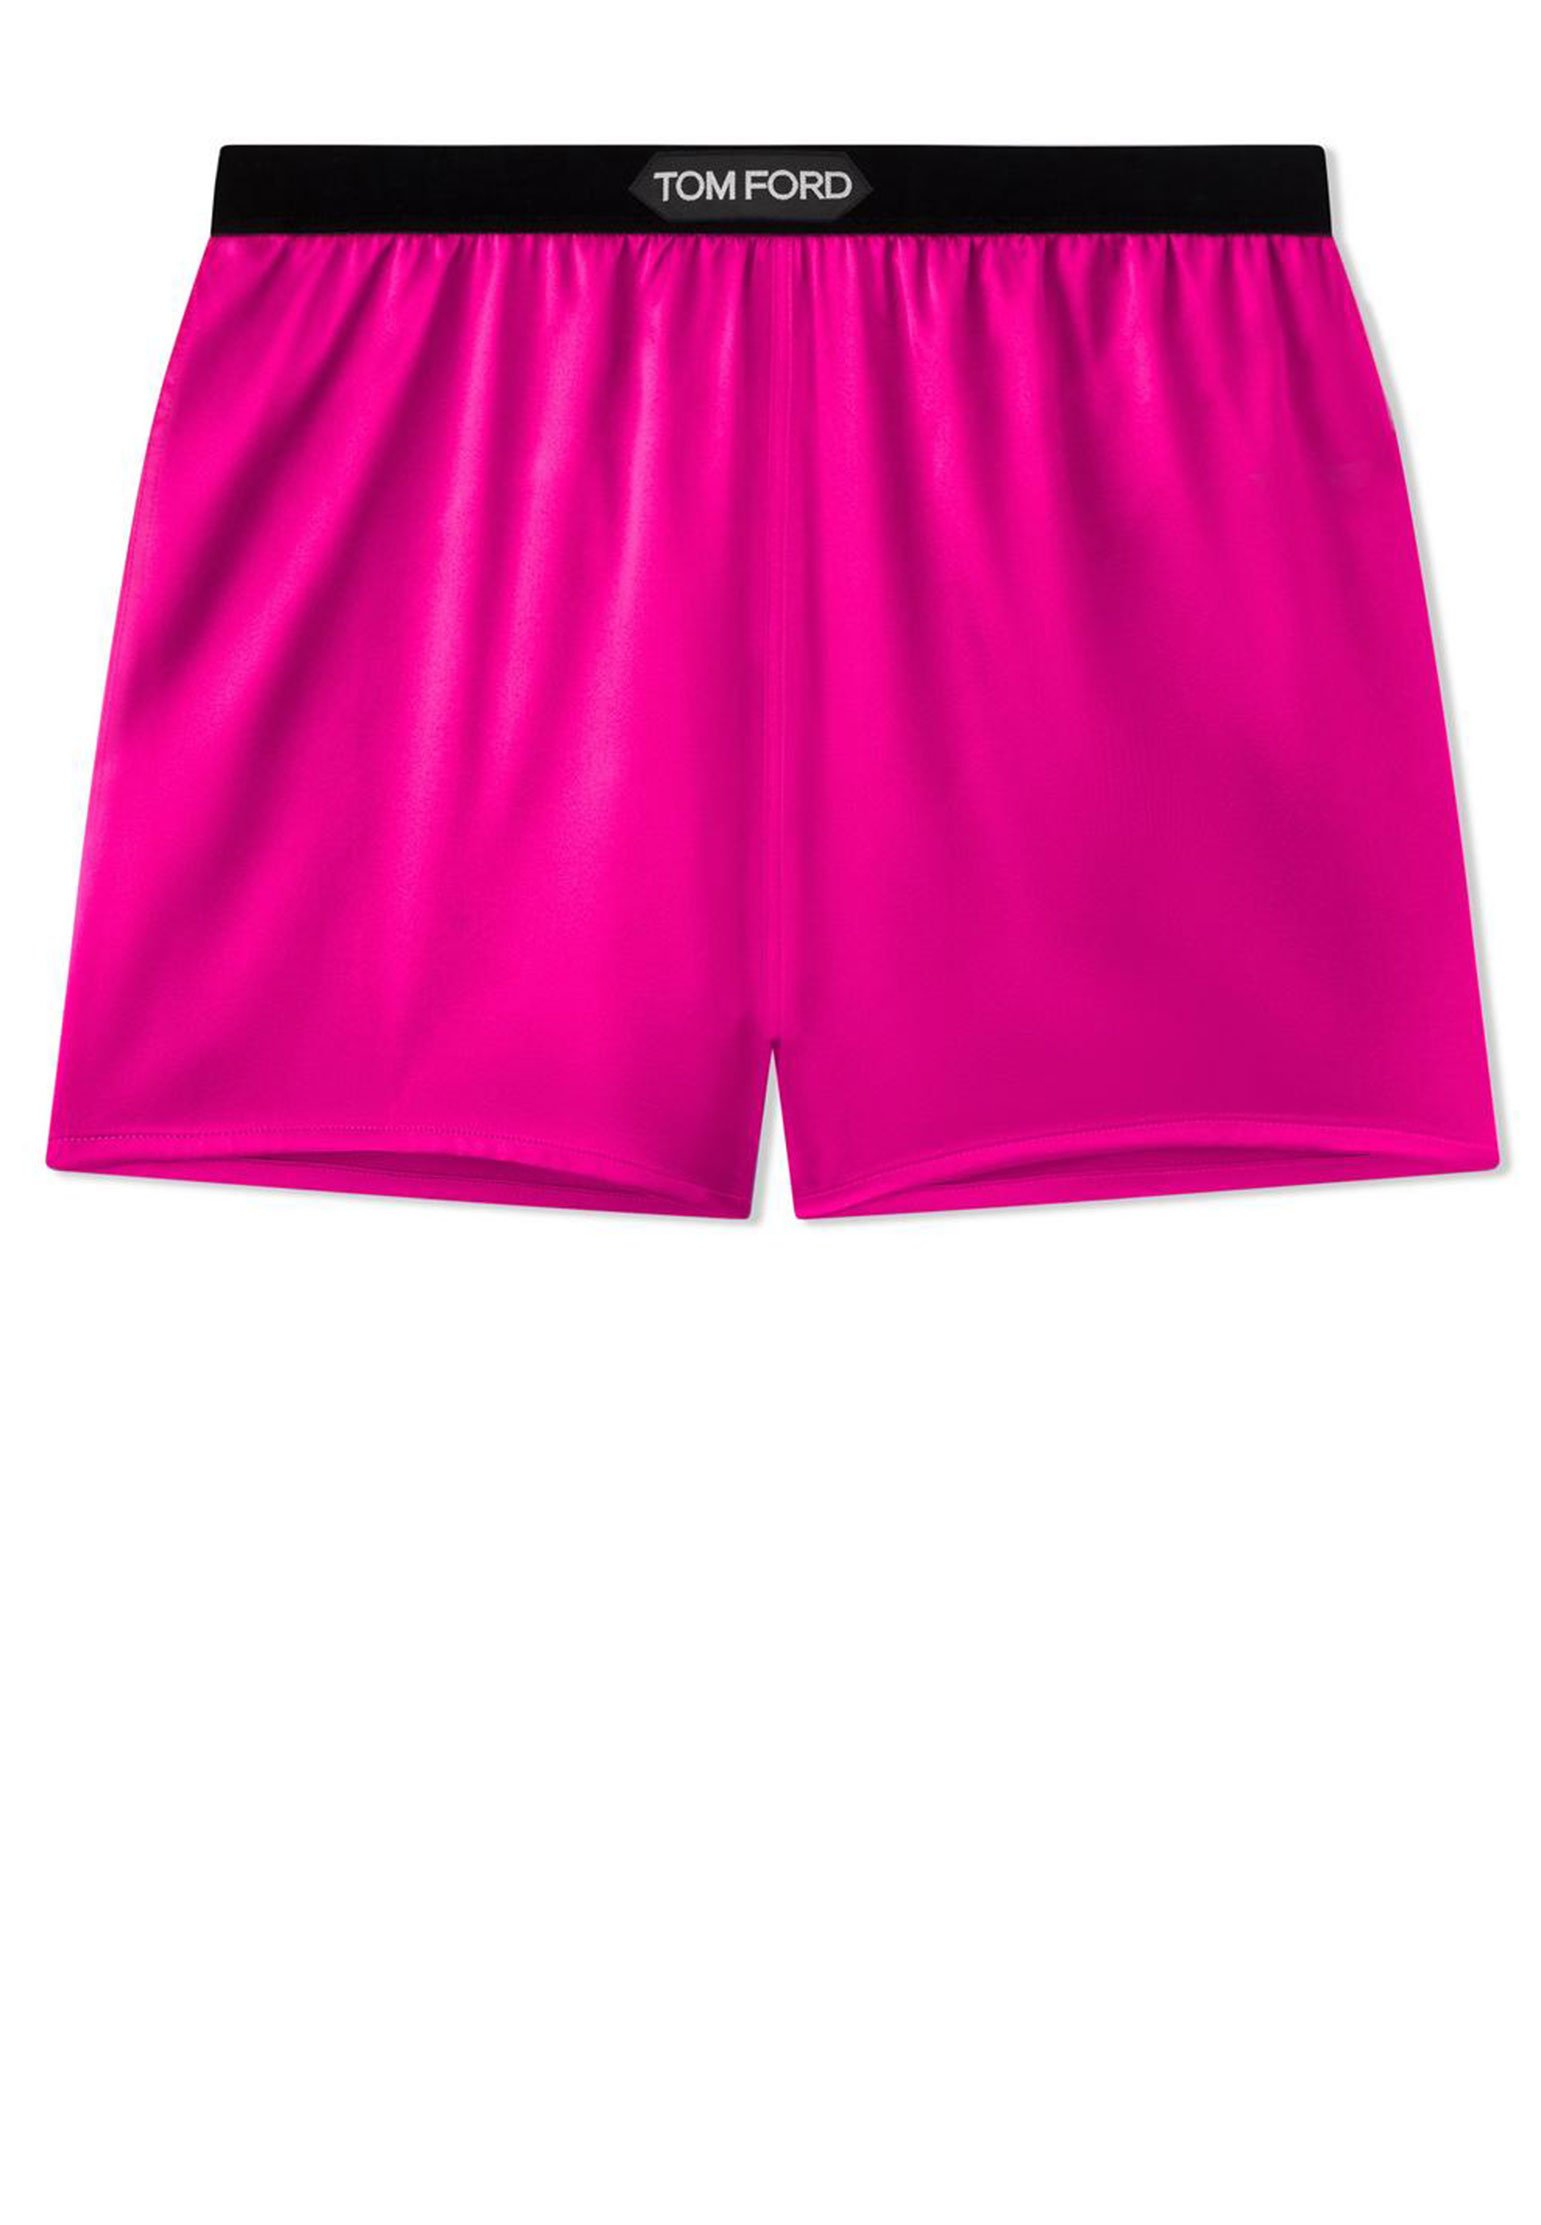 Shorts TOM FORD Color: pink (Code: 1946) in online store Allure